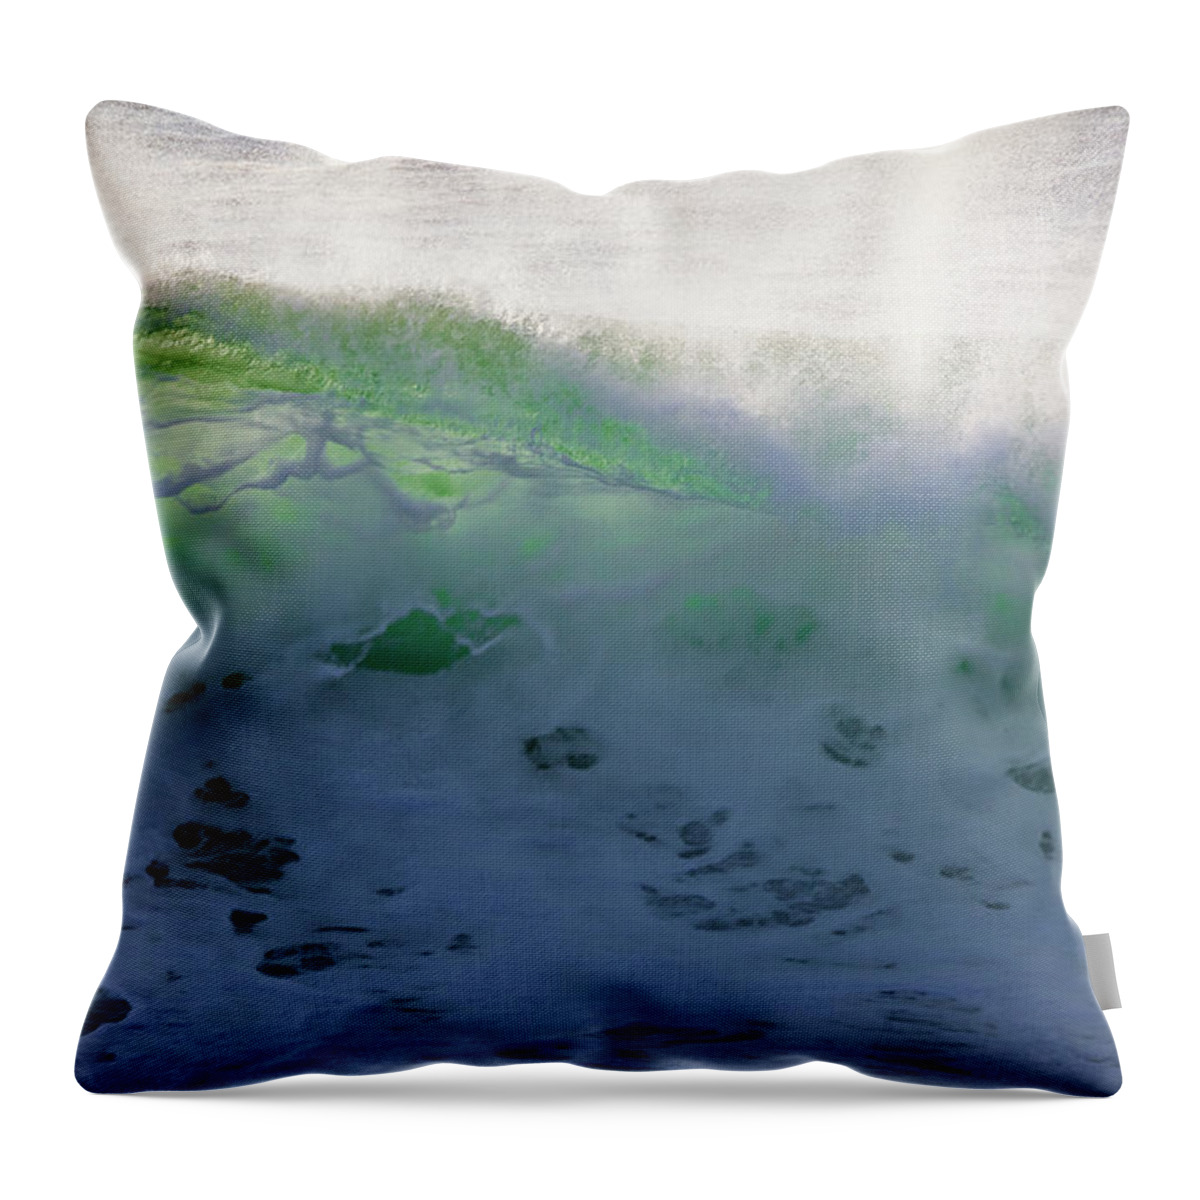 Acadia National Park Throw Pillow featuring the photograph Translucent by Susan Cole Kelly